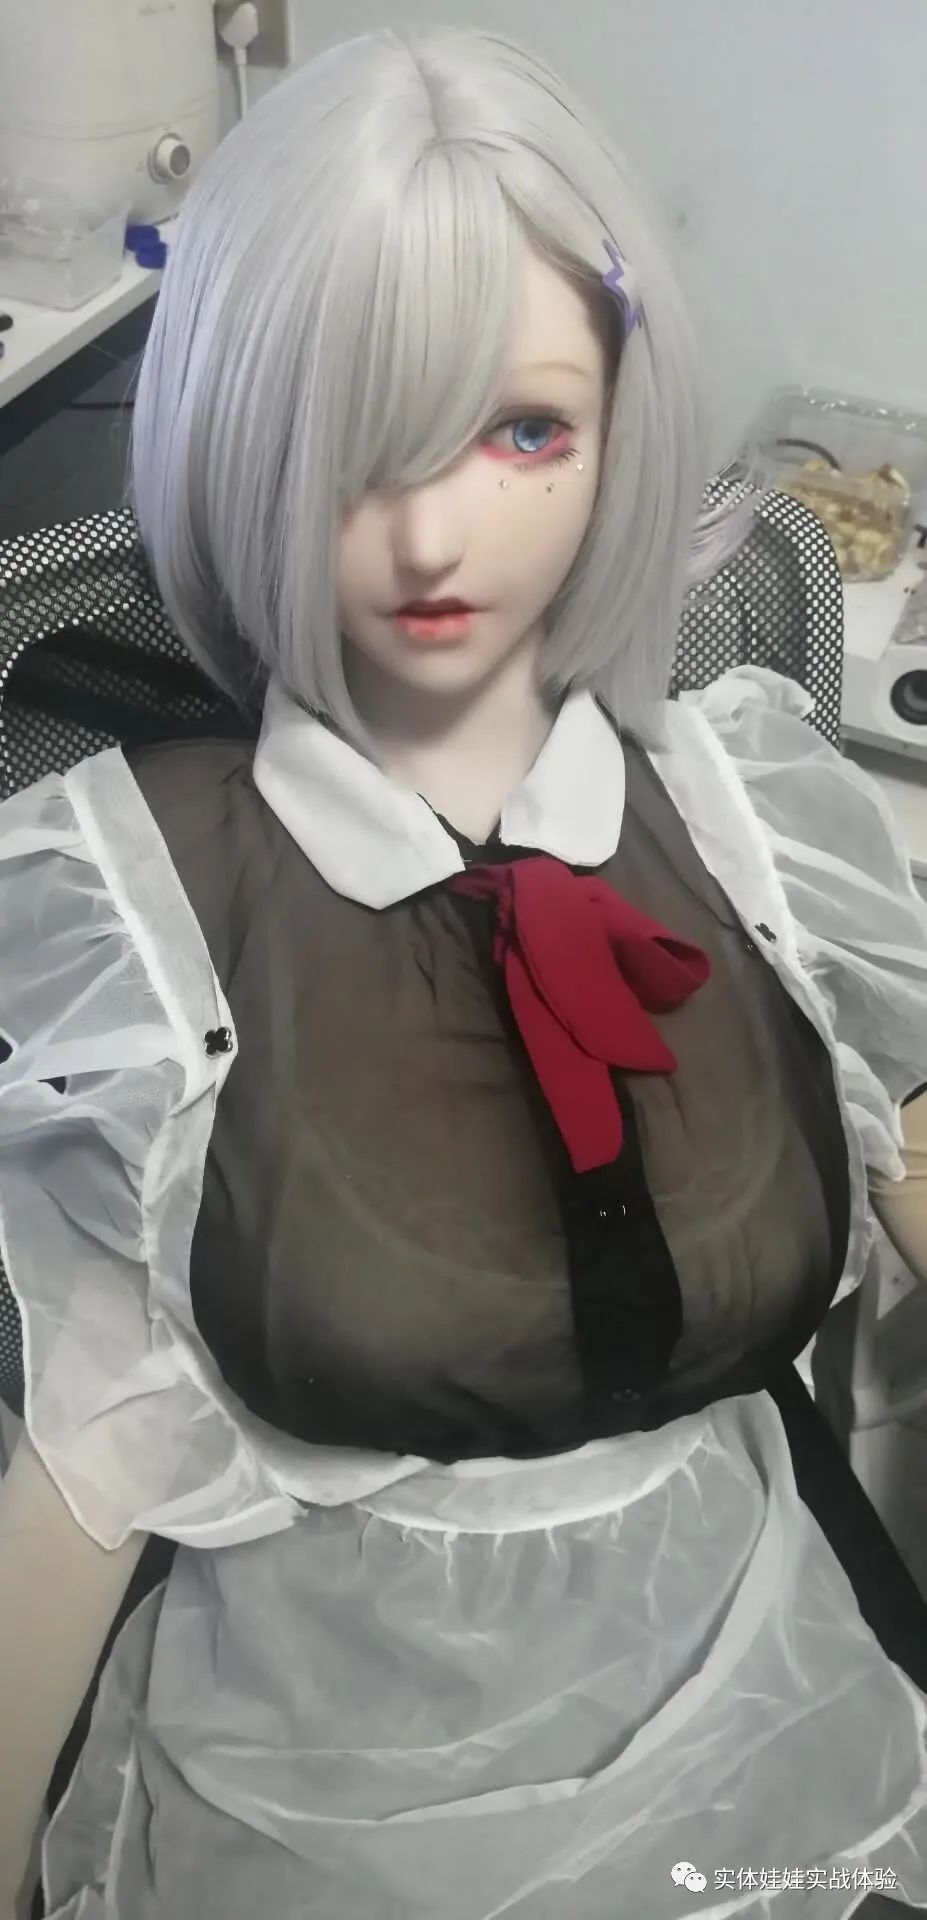 Physical doll must read before buying